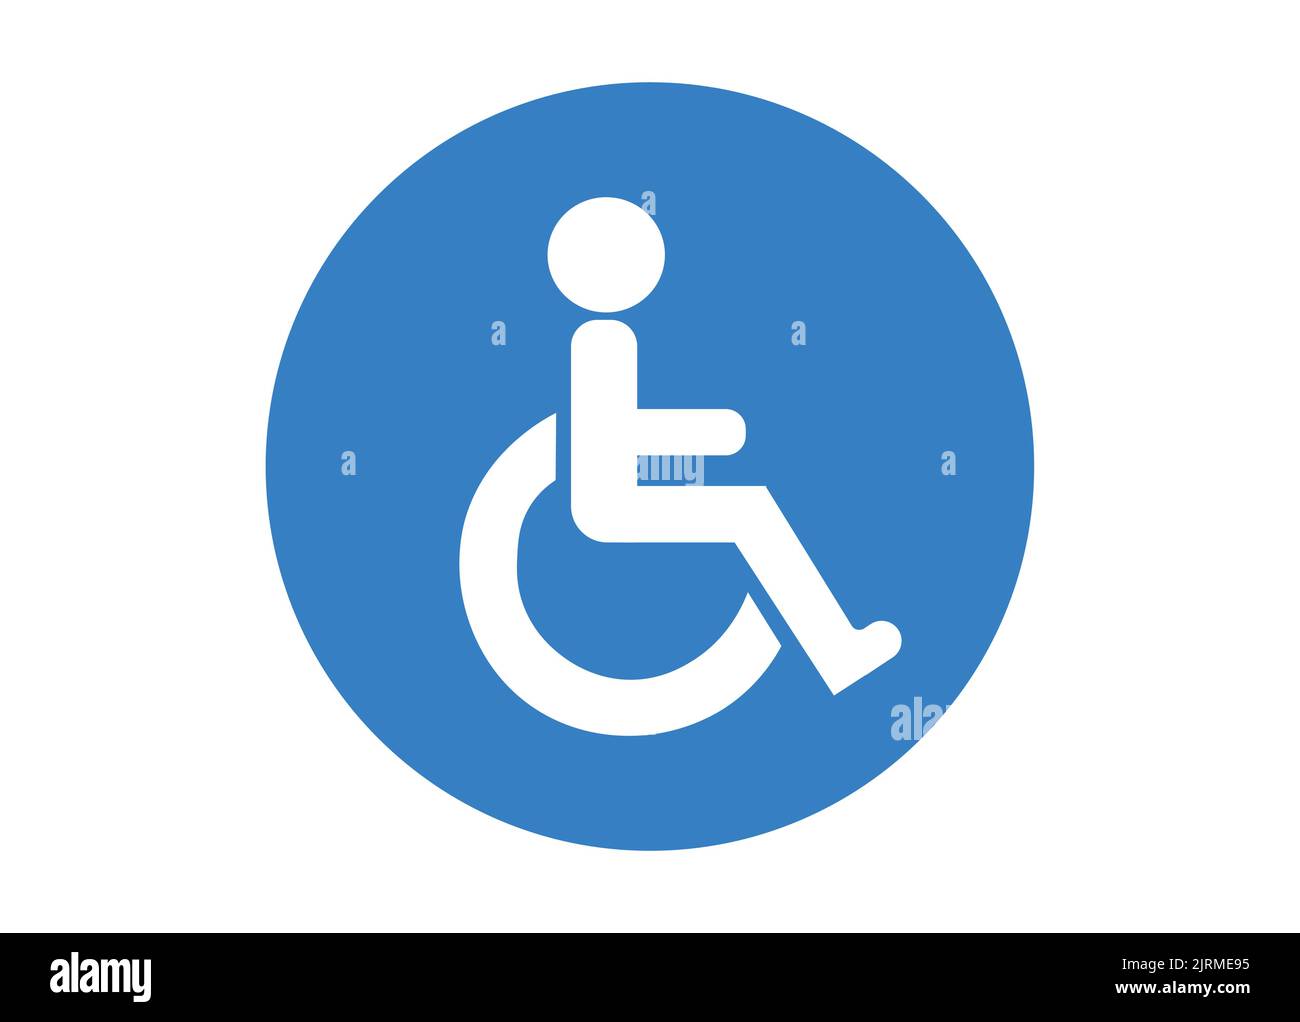 Wheelchair symbol Cut Out Stock Images & Pictures - Alamy